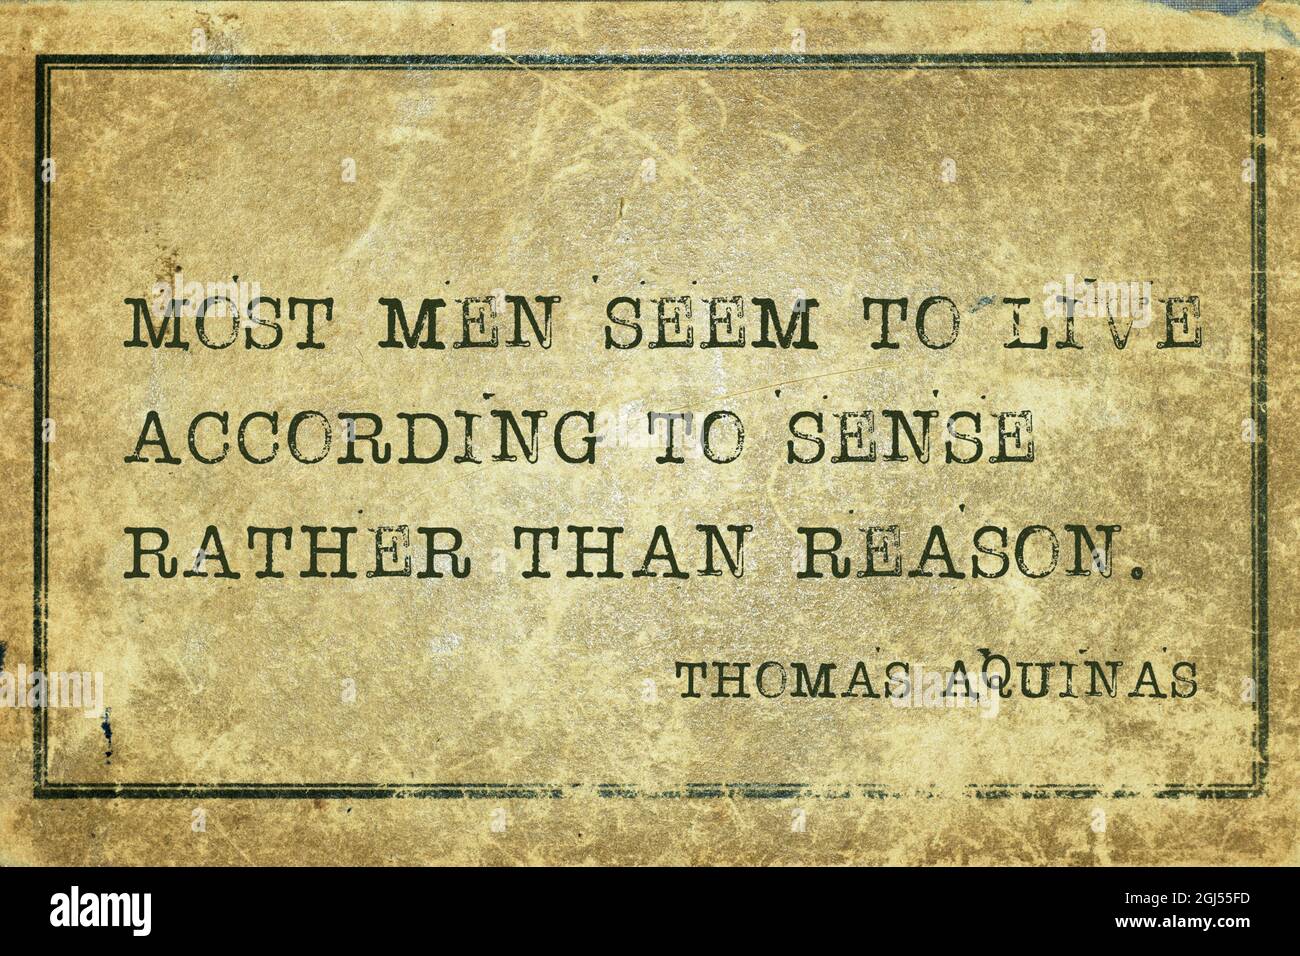 Most men seem to live according to sense rather than reason - quote of ancient Italian priest, theologian and philosopher Thomas Aquinas printed on gr Stock Photo